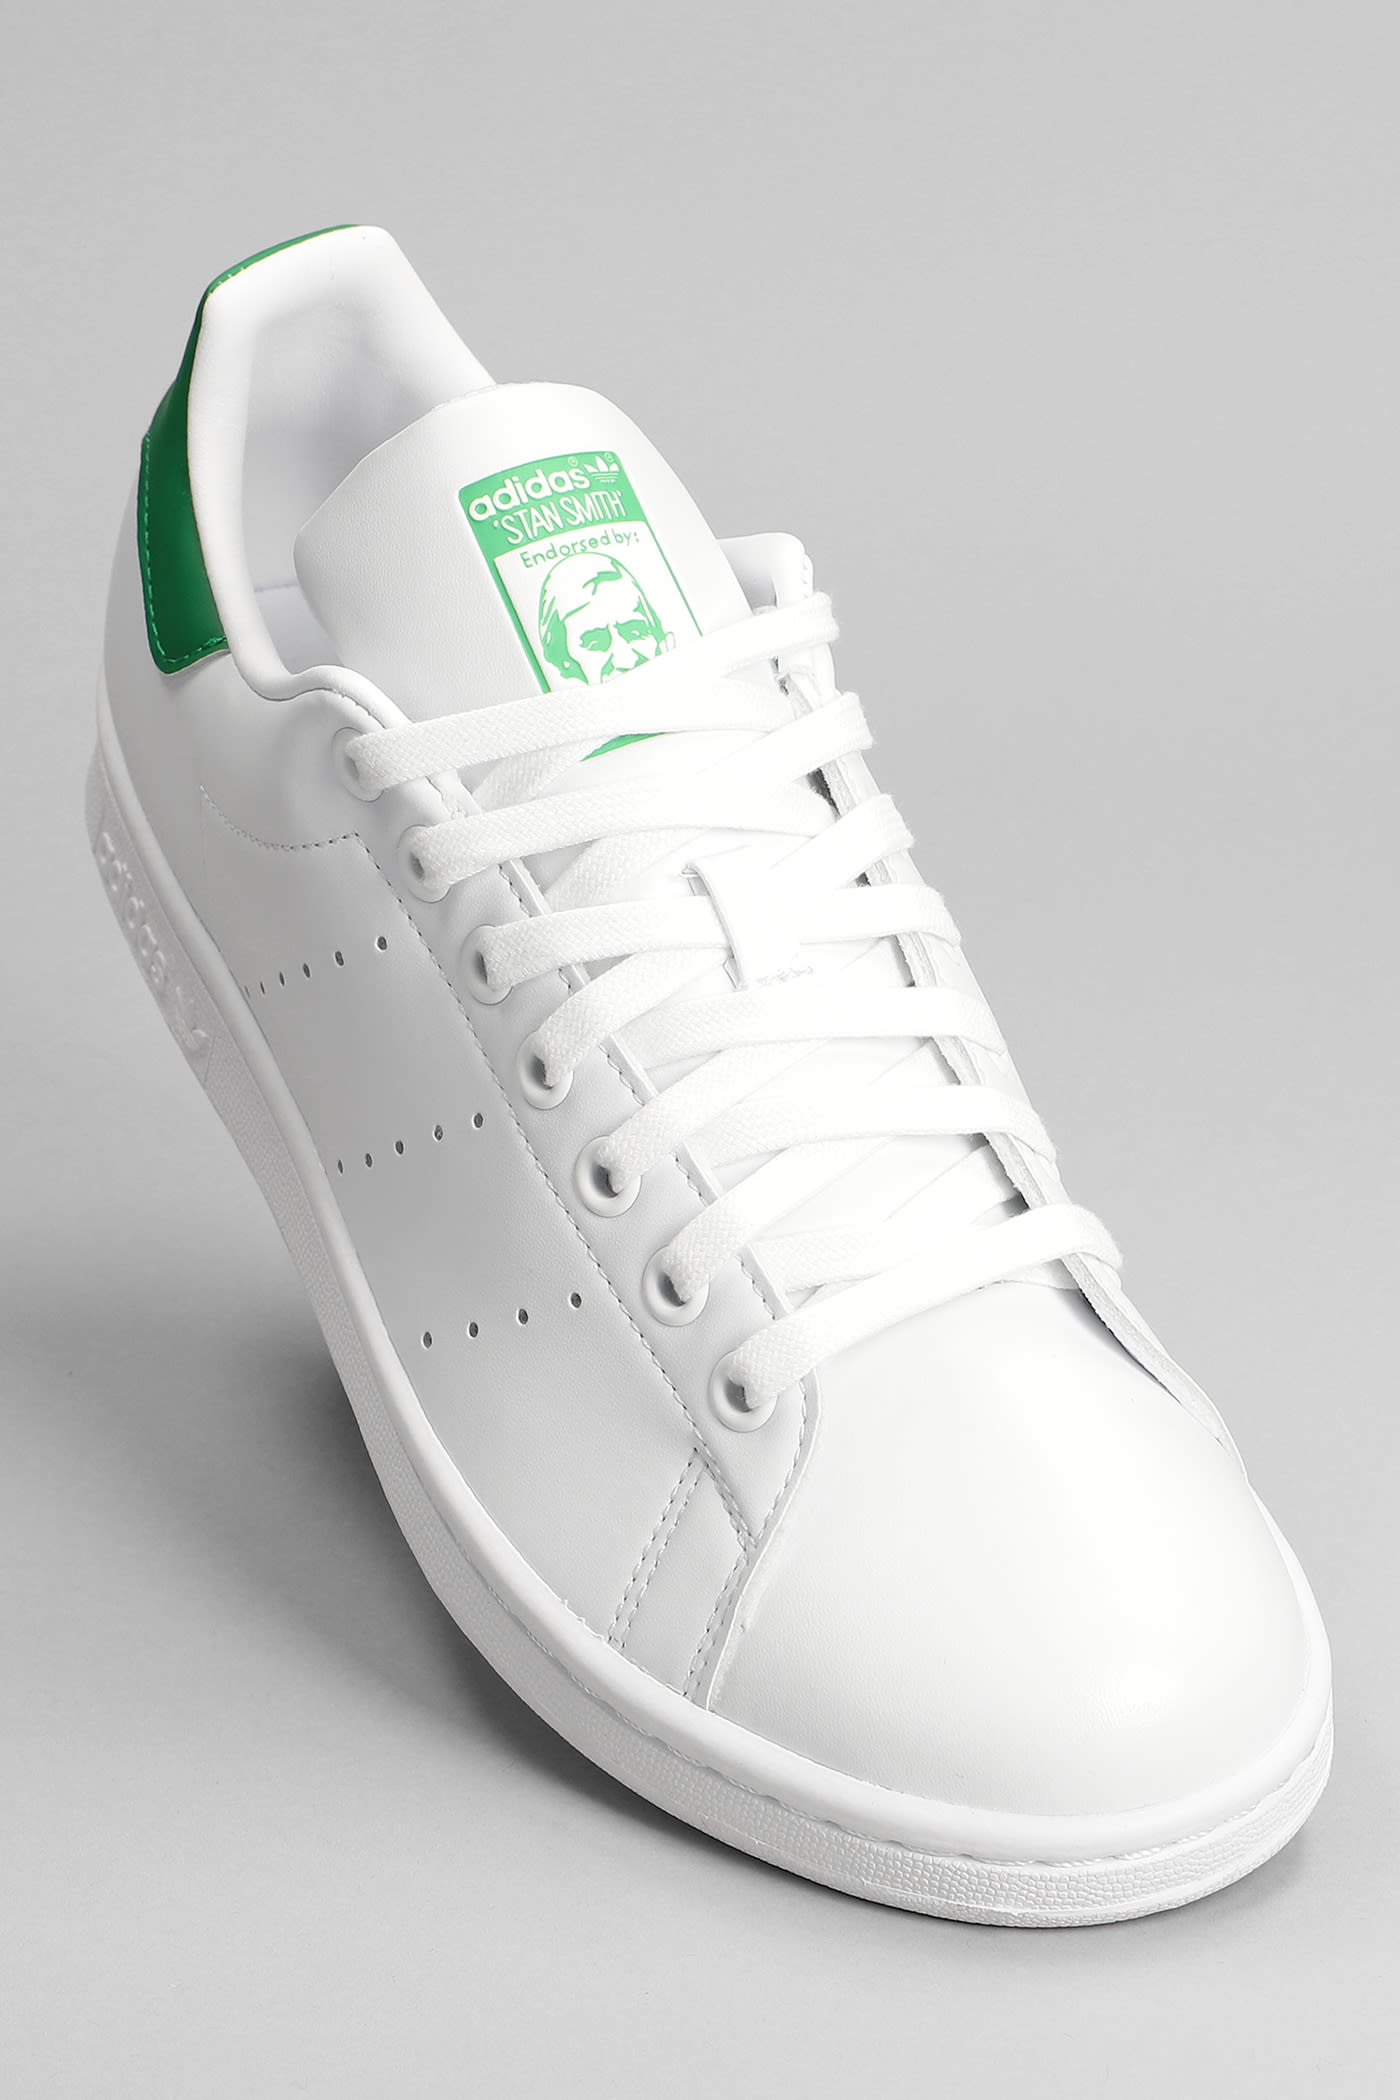 Shop Adidas Originals Stan Smith Sneakers In White Leather In White And Green